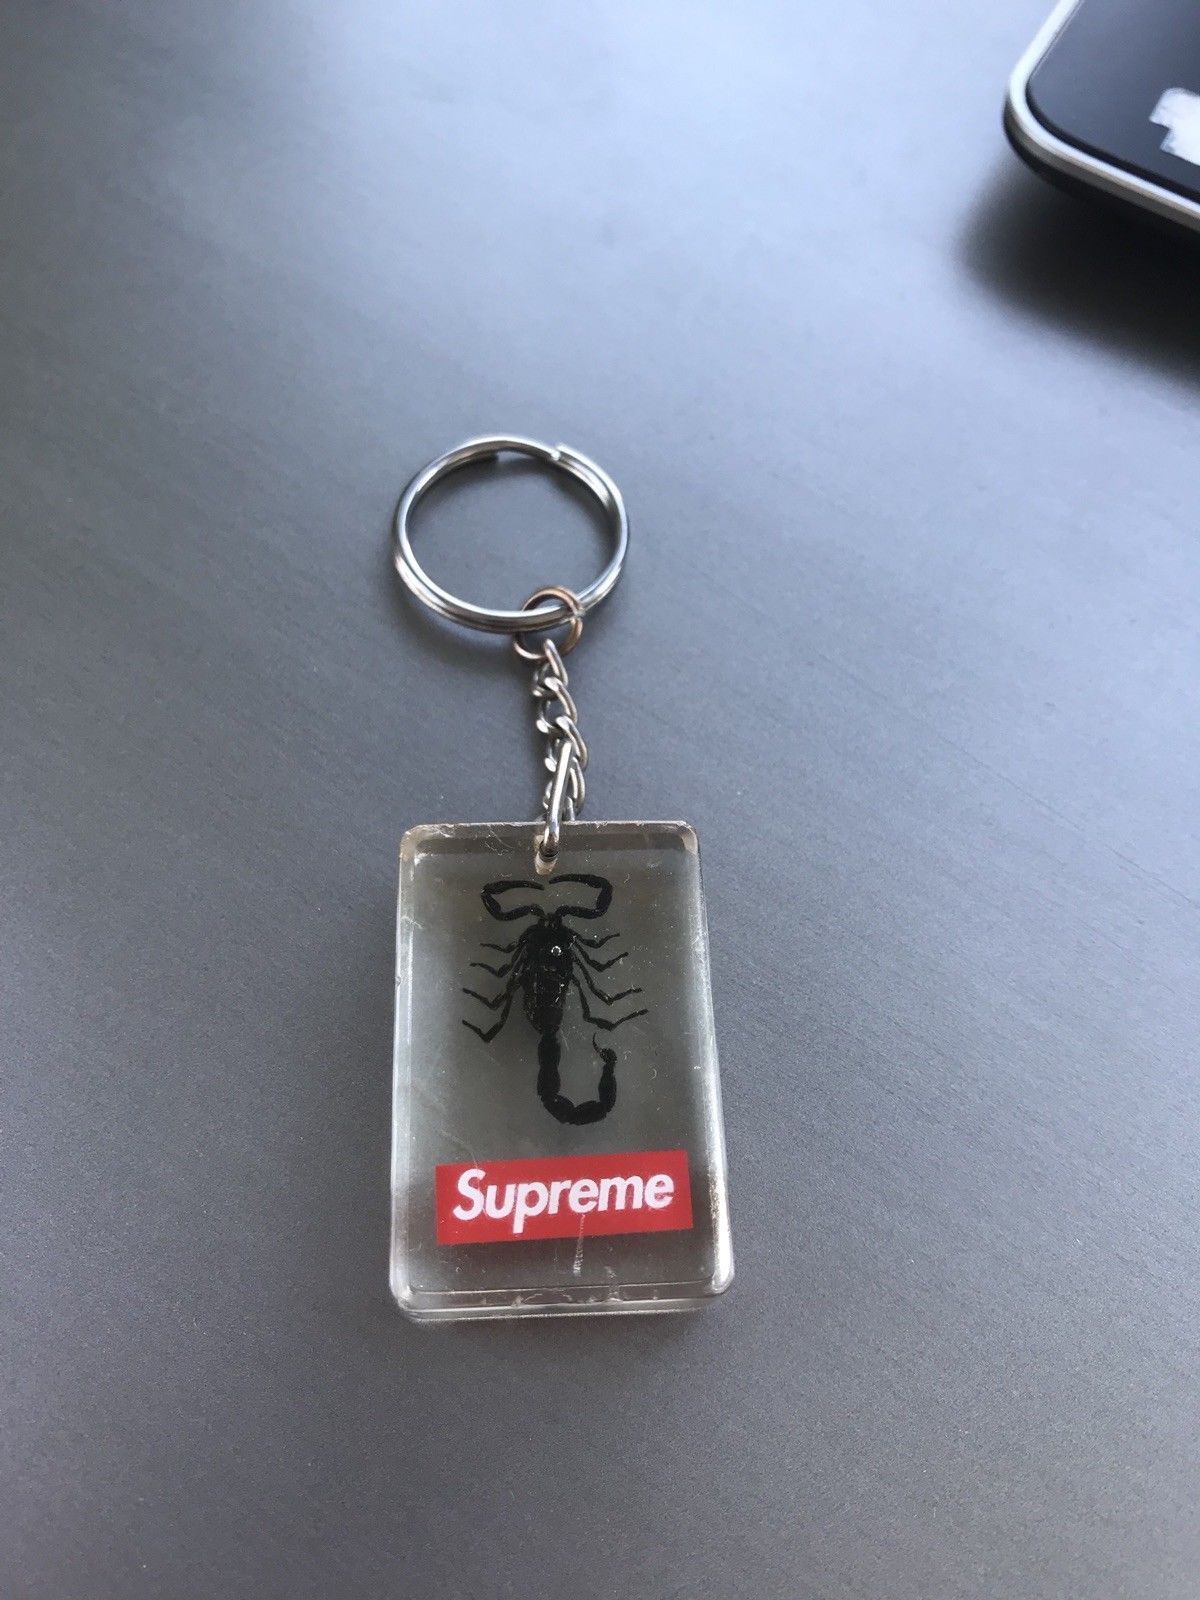 Key Chains, Rings & Cases